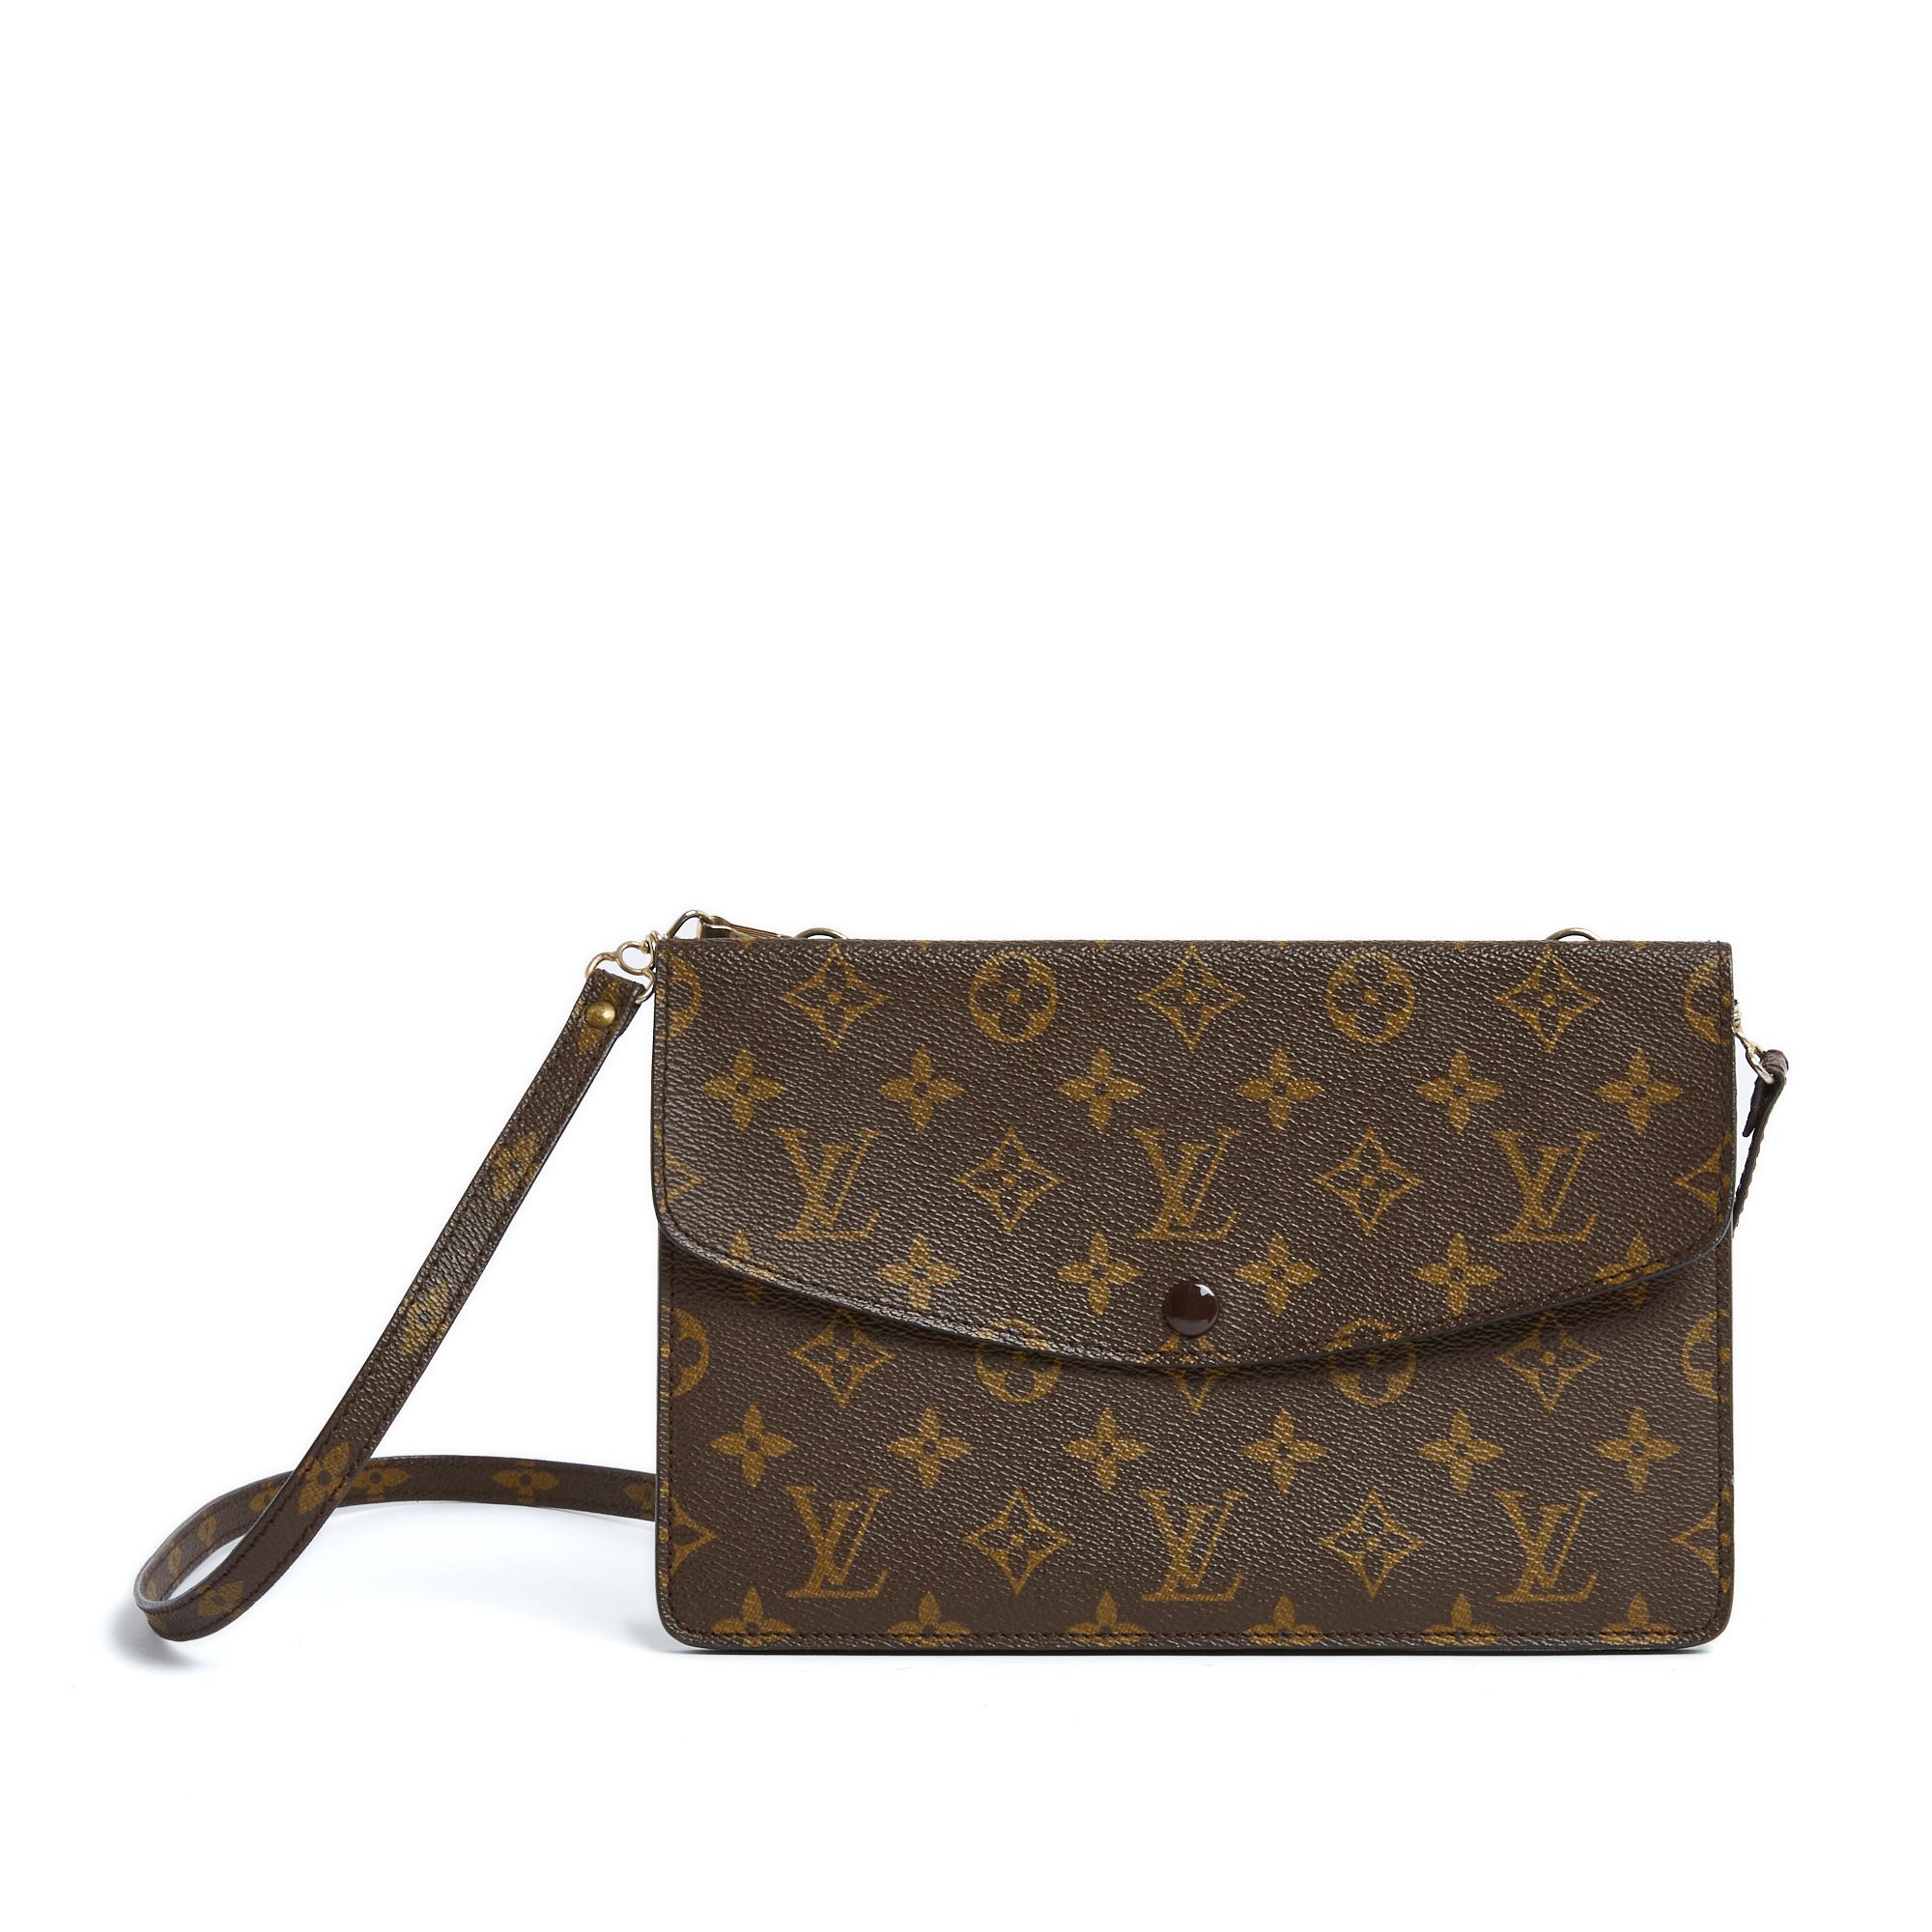 Louis Vuitton bag composed of a Félicie style clutch, double, in Monogram canvas decorated with a thin removable strap for shoulder or cross body wear, natural leather interior with 2 pockets (on each side), flaps closed with a snap, l 'one enameled